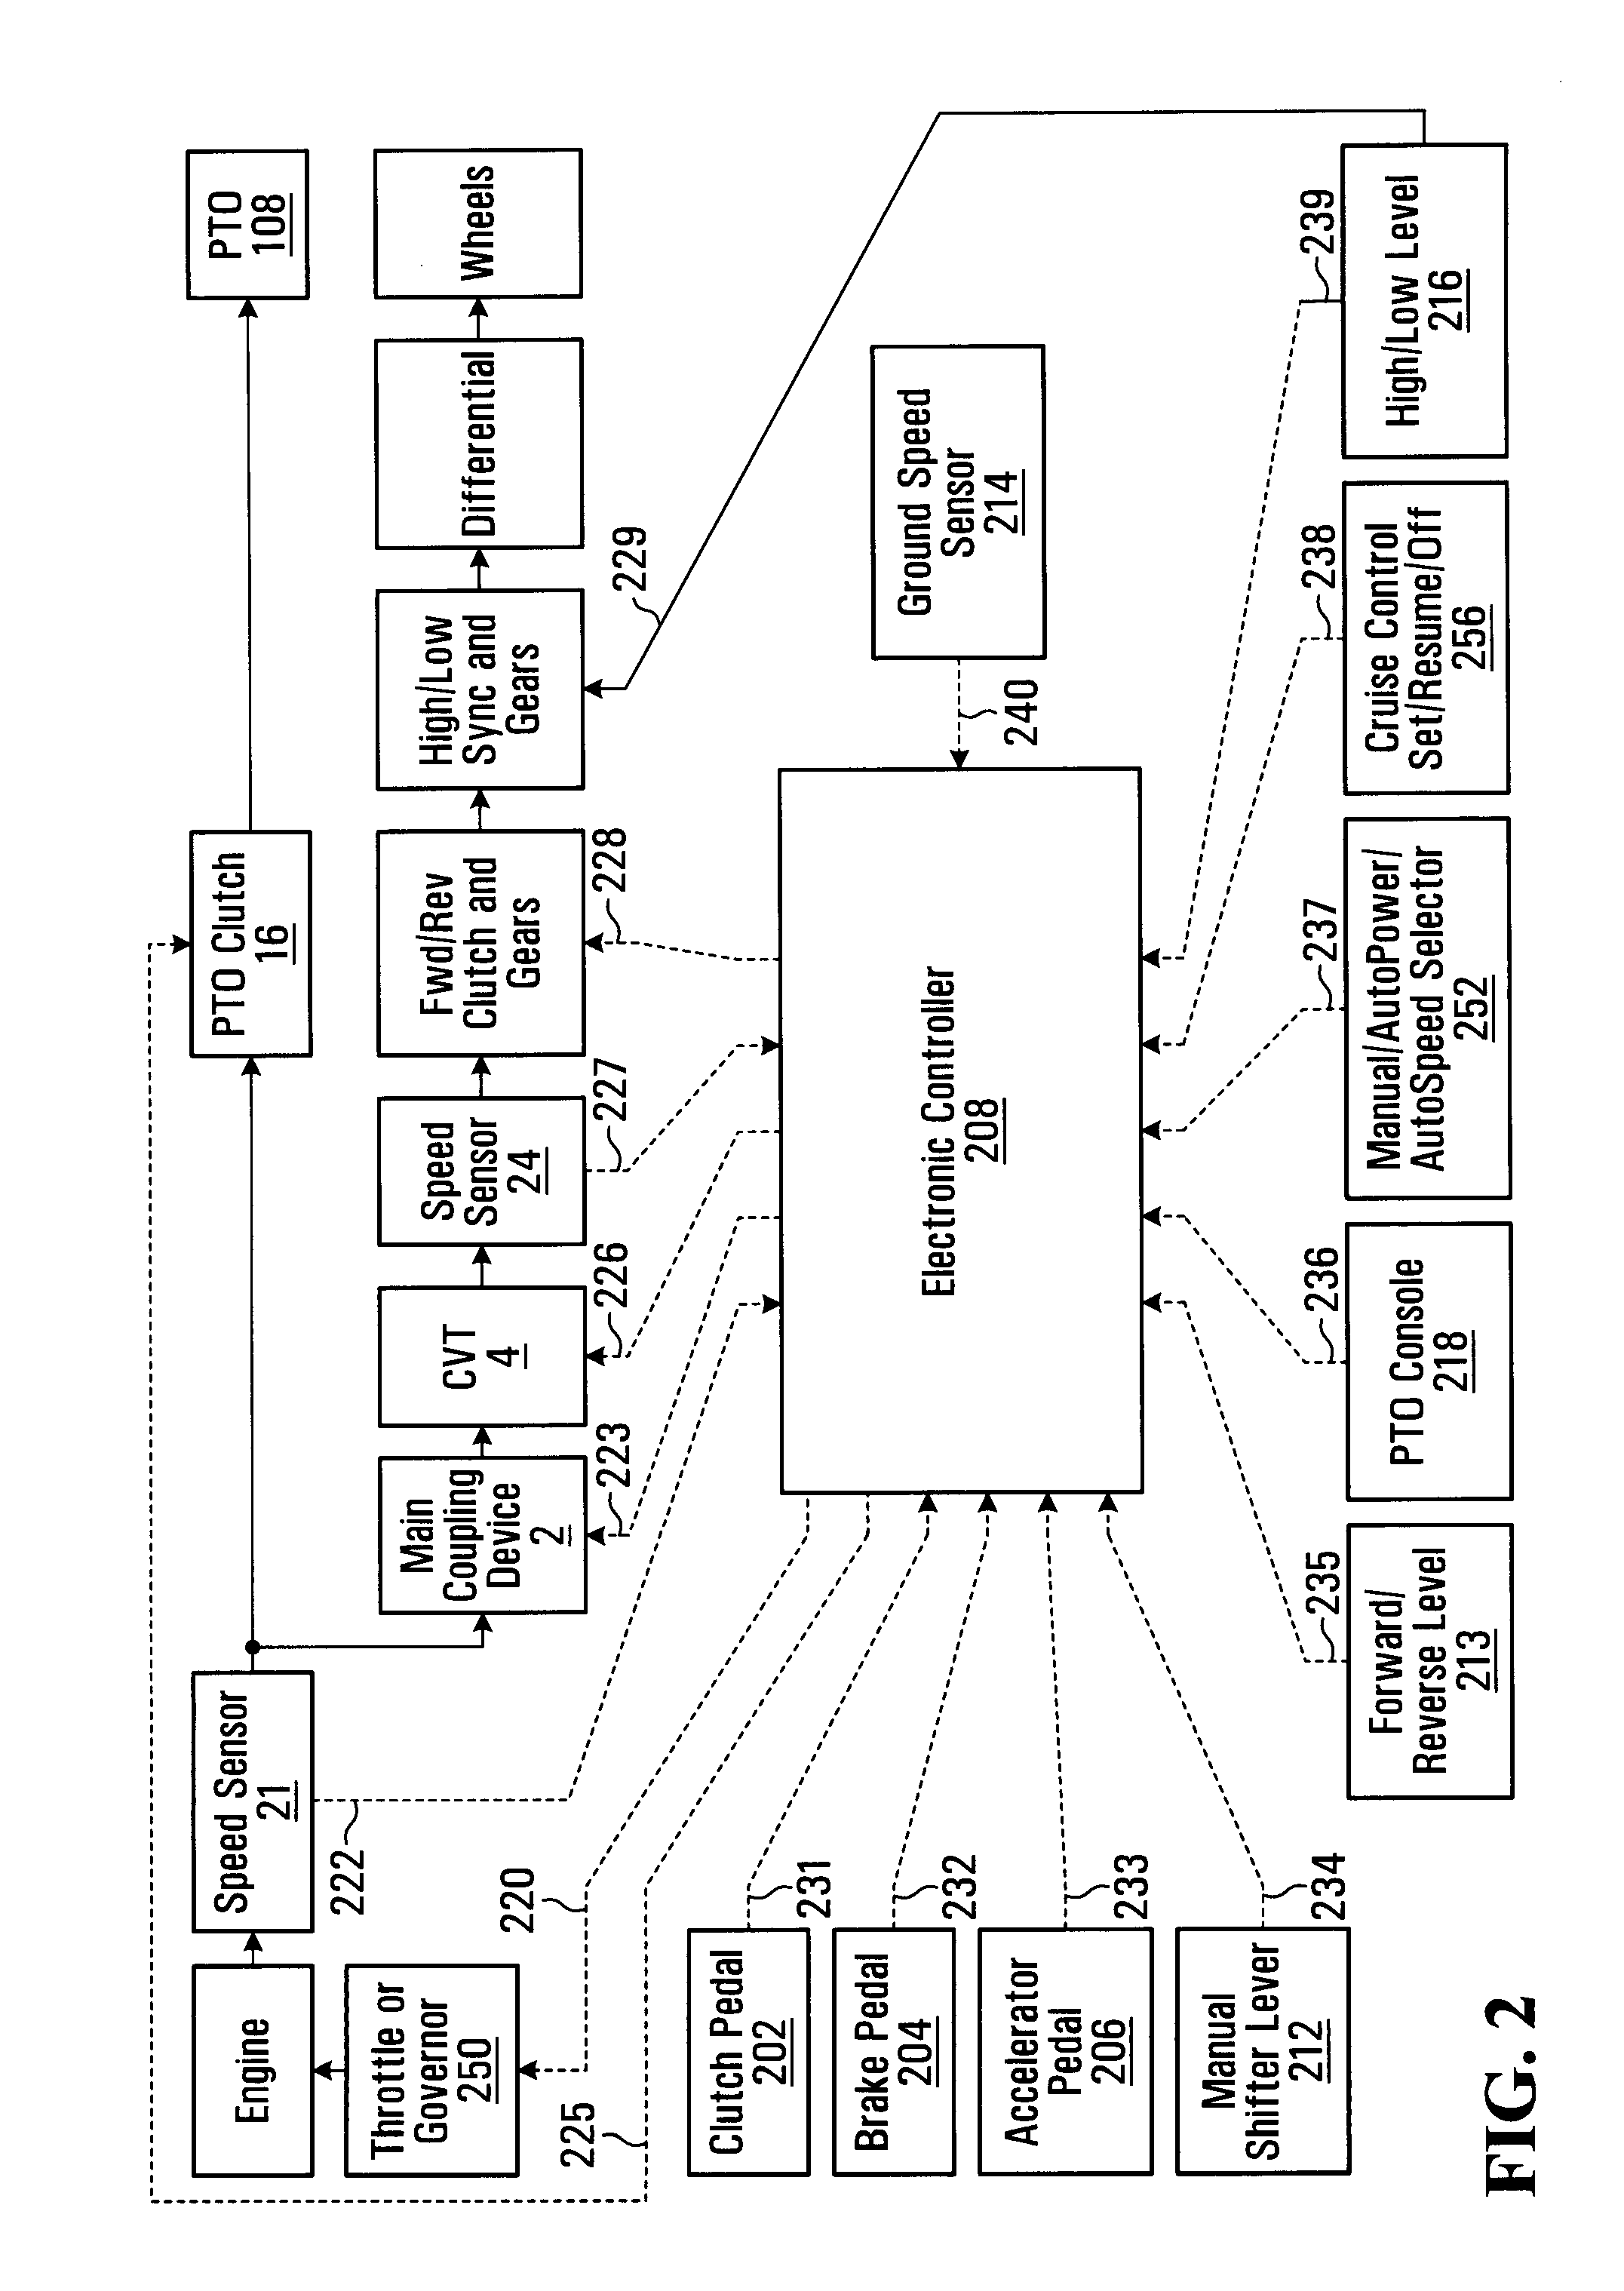 Mechanical cvt drive train and control method for earth working vehicle